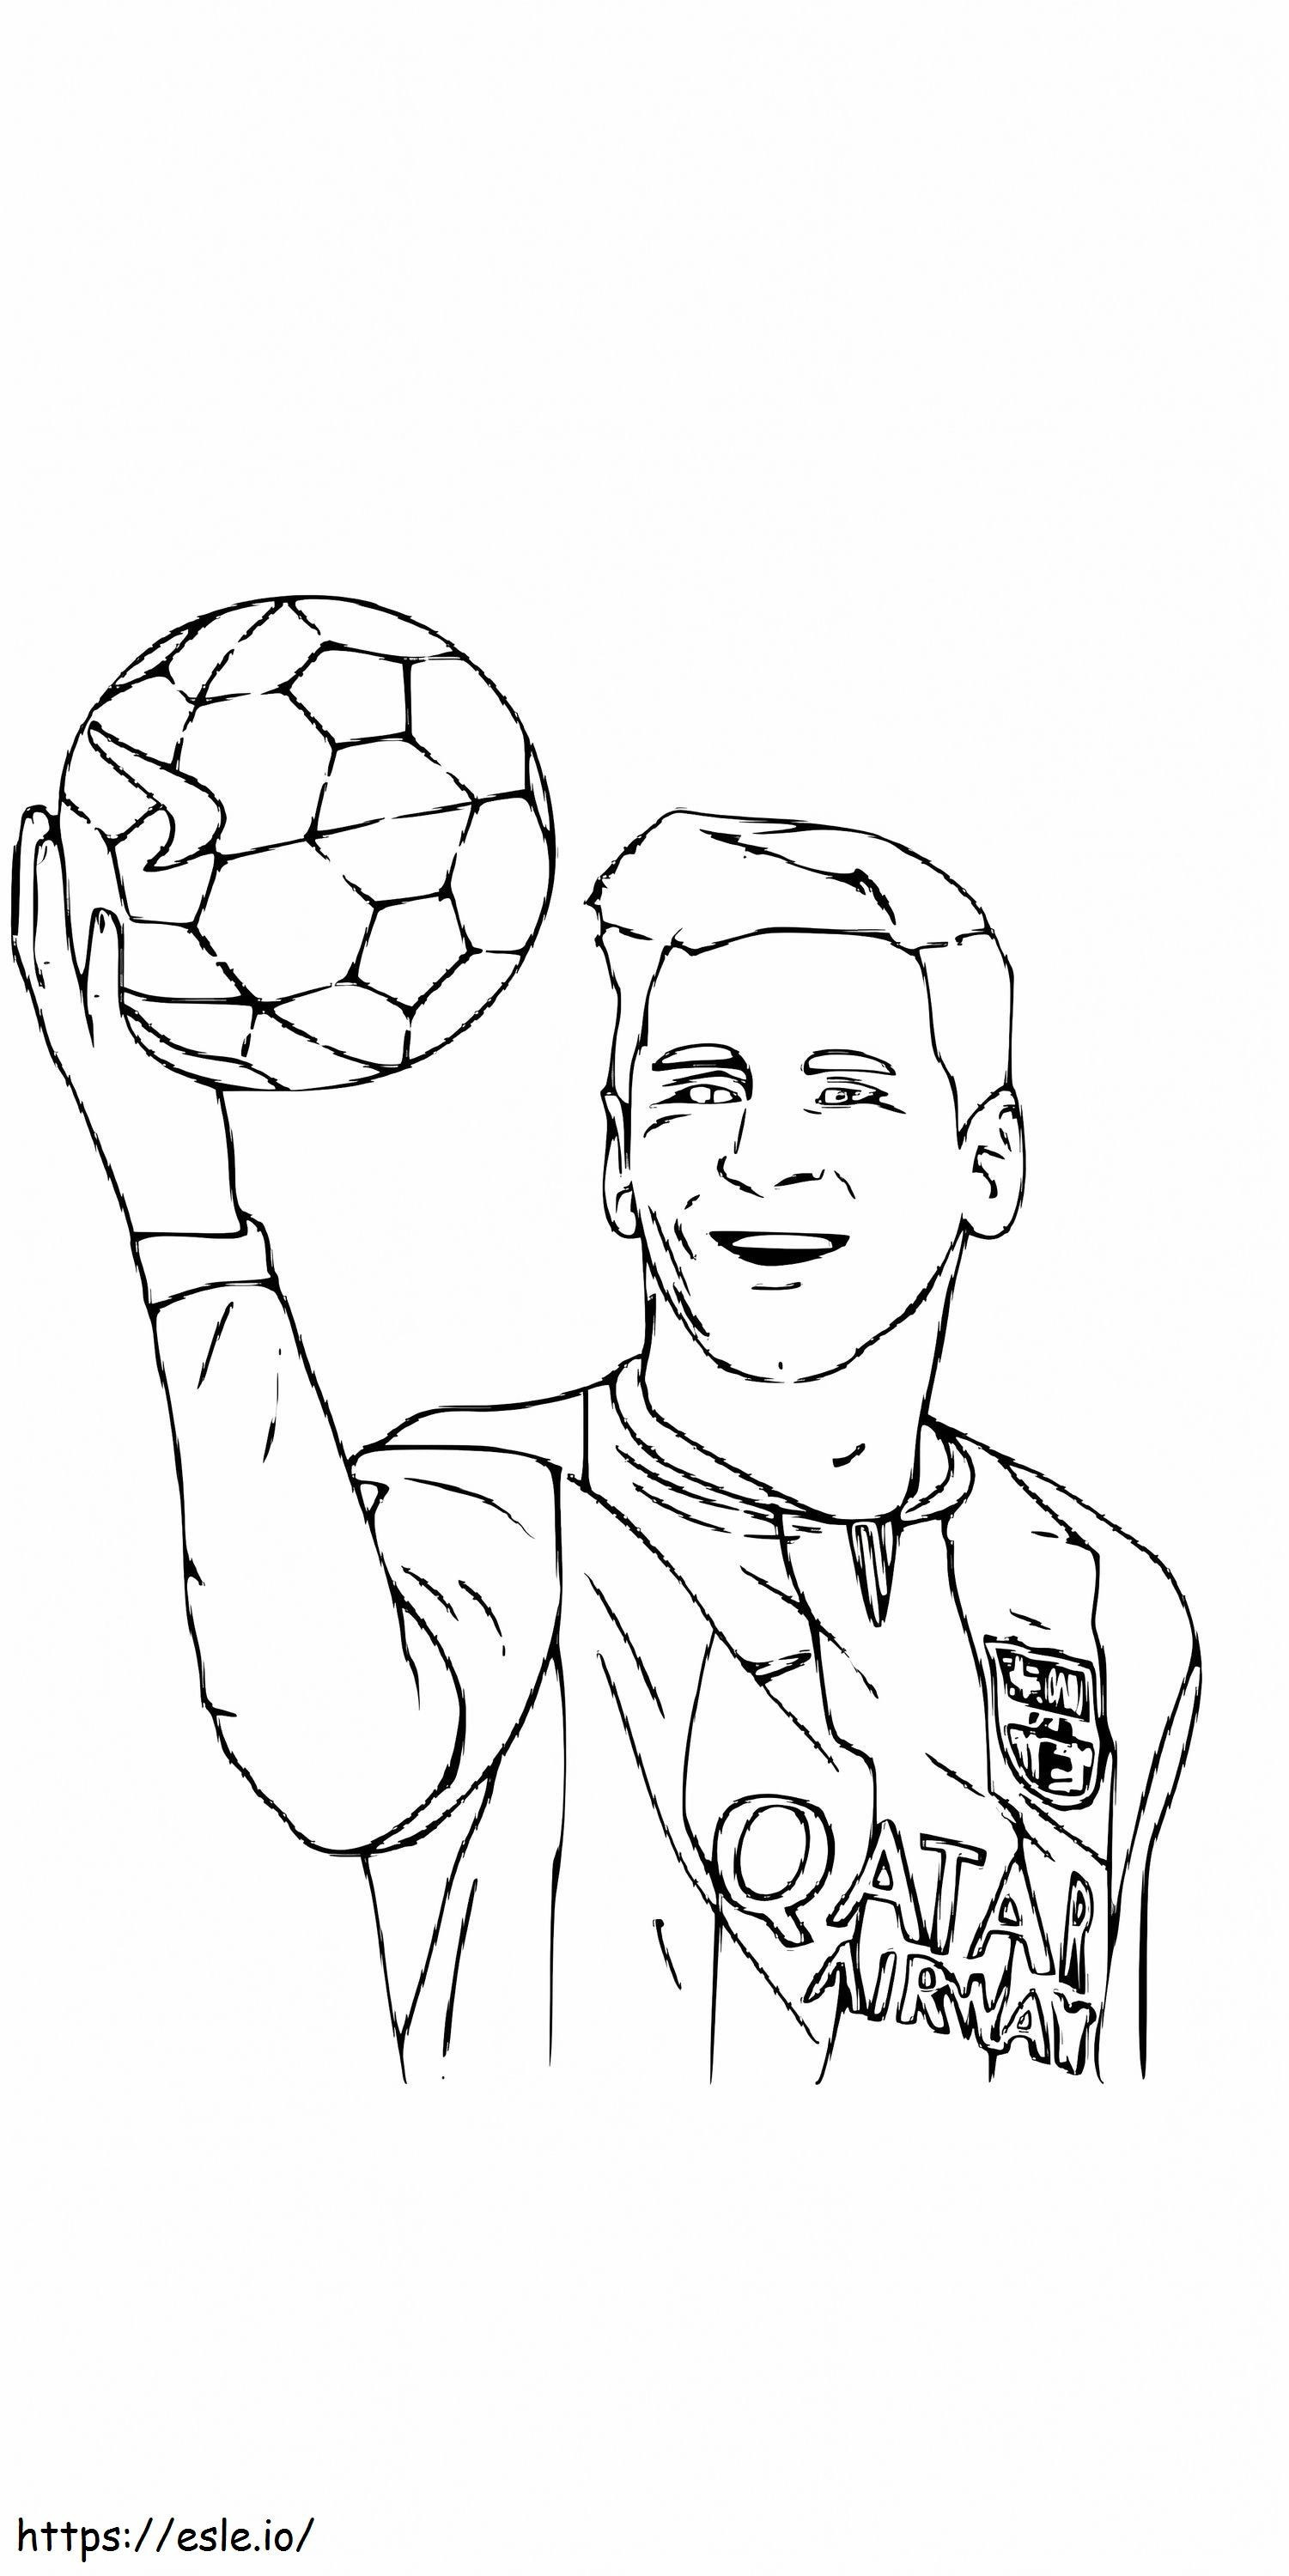 Cup 09 coloring page